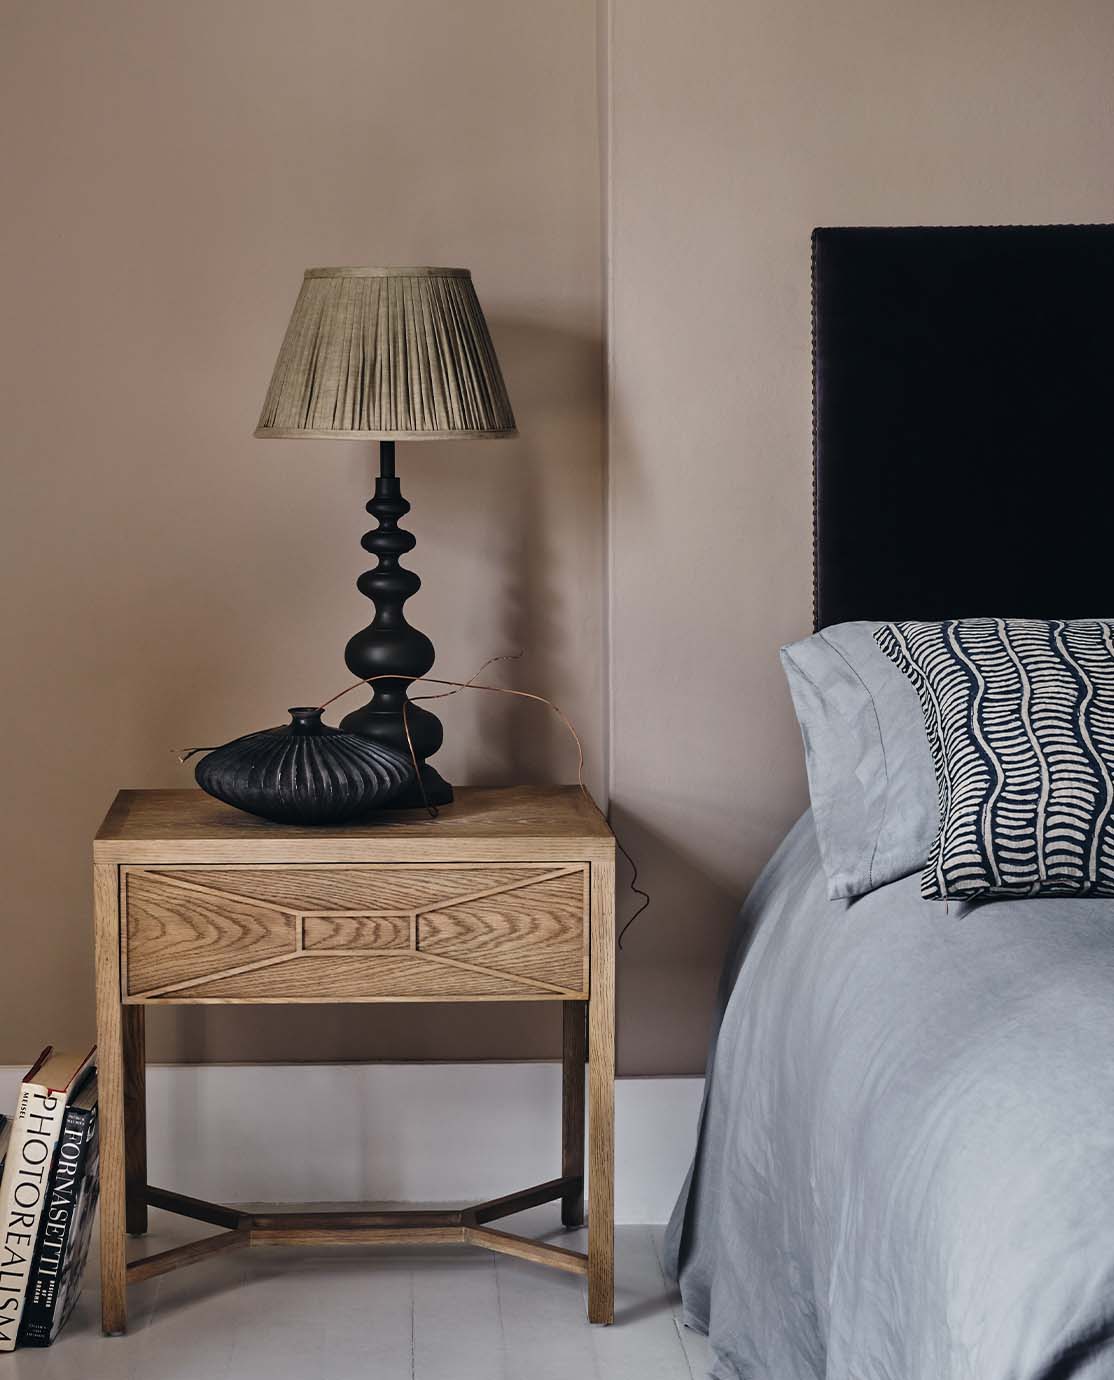 A black sculptural lamp with a curvy silhouette sits on a wooden bedside table.